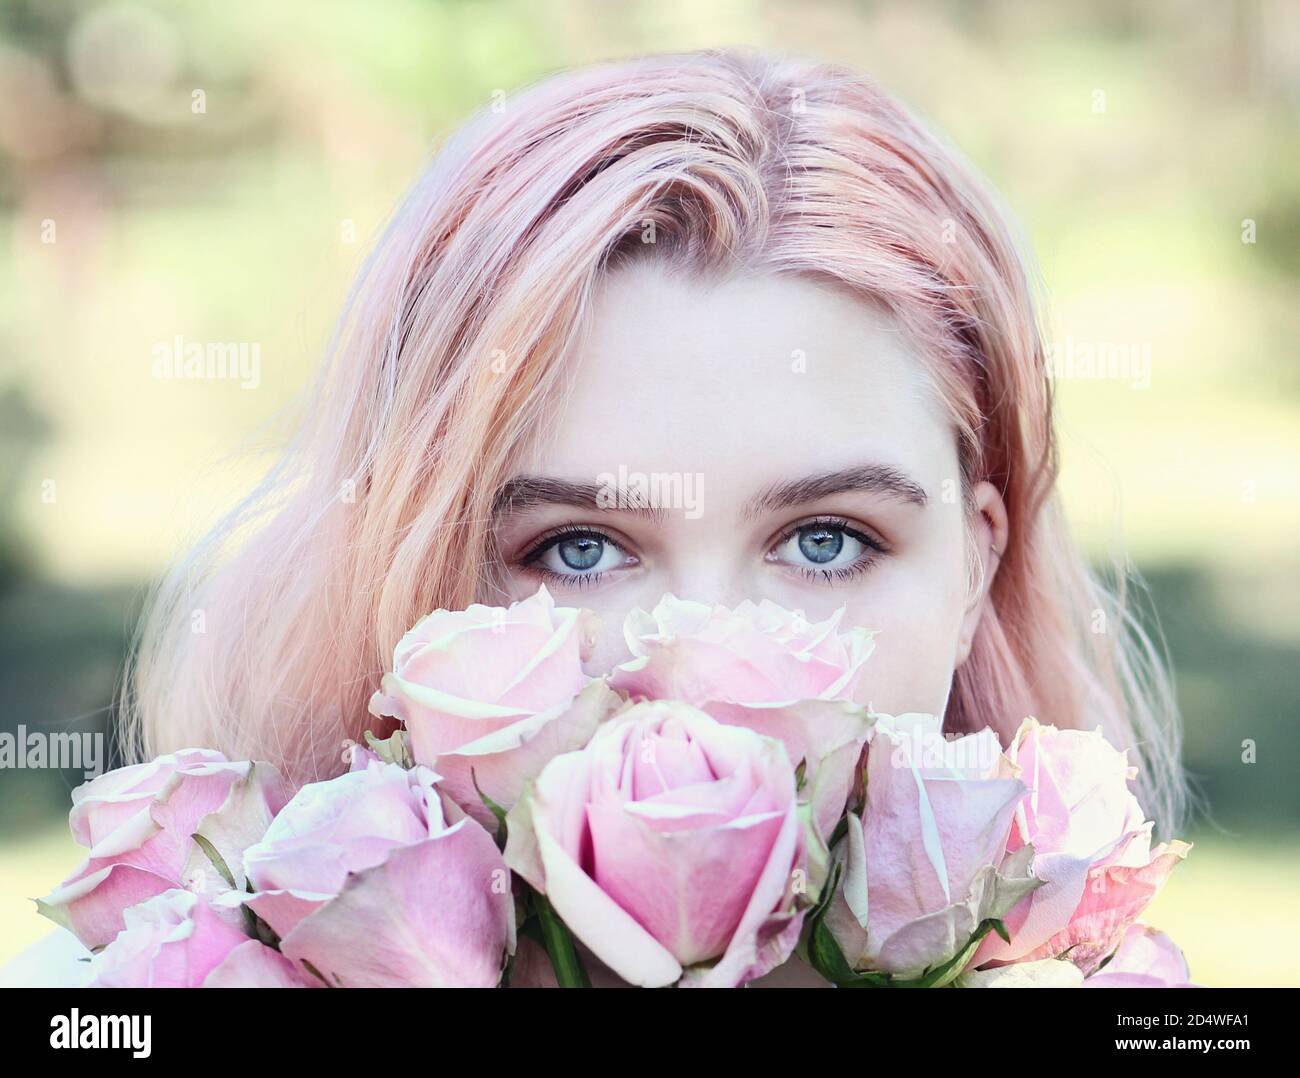 Beautiful girl with blue eyes sniffs pink roses, outdoors. Summertime. Stock Photo